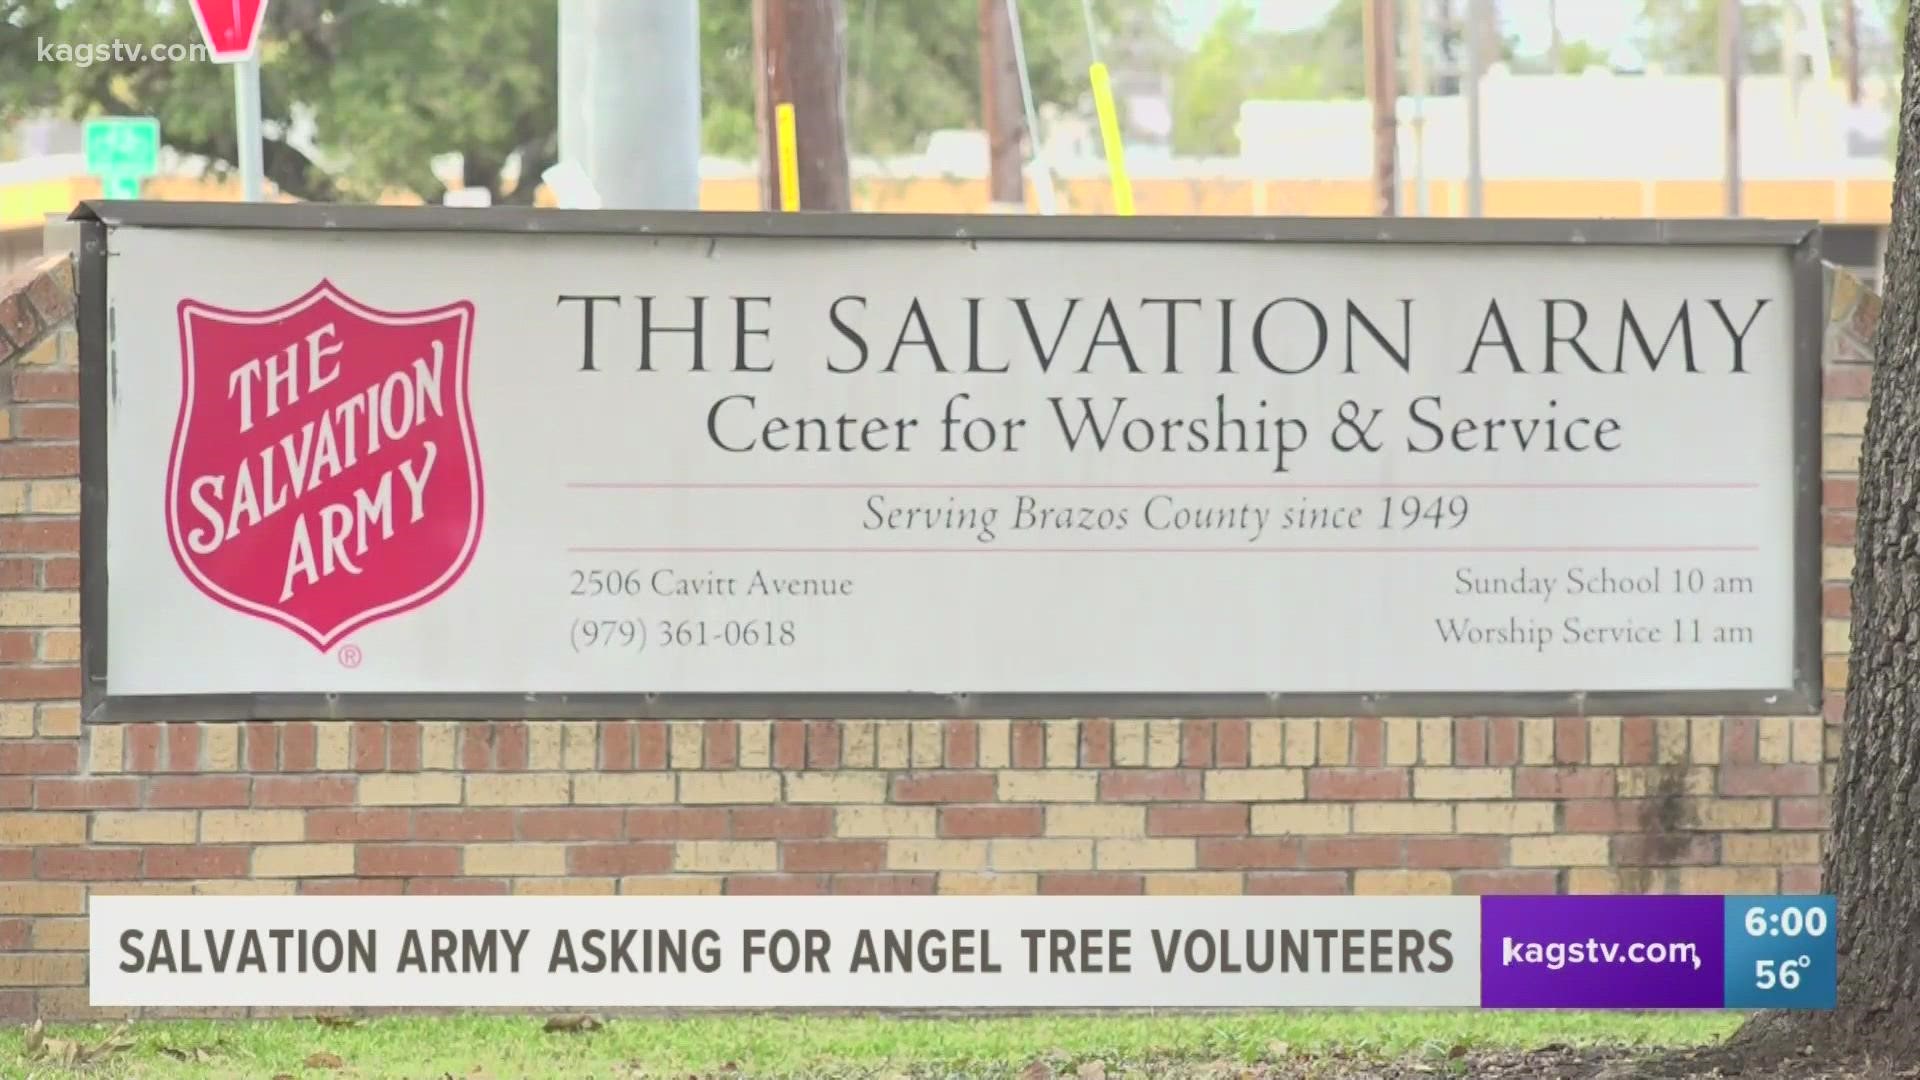 The Salvation Army Bryan/College Station is seeking out vital volunteers and gifts for their annual Angel Tree program